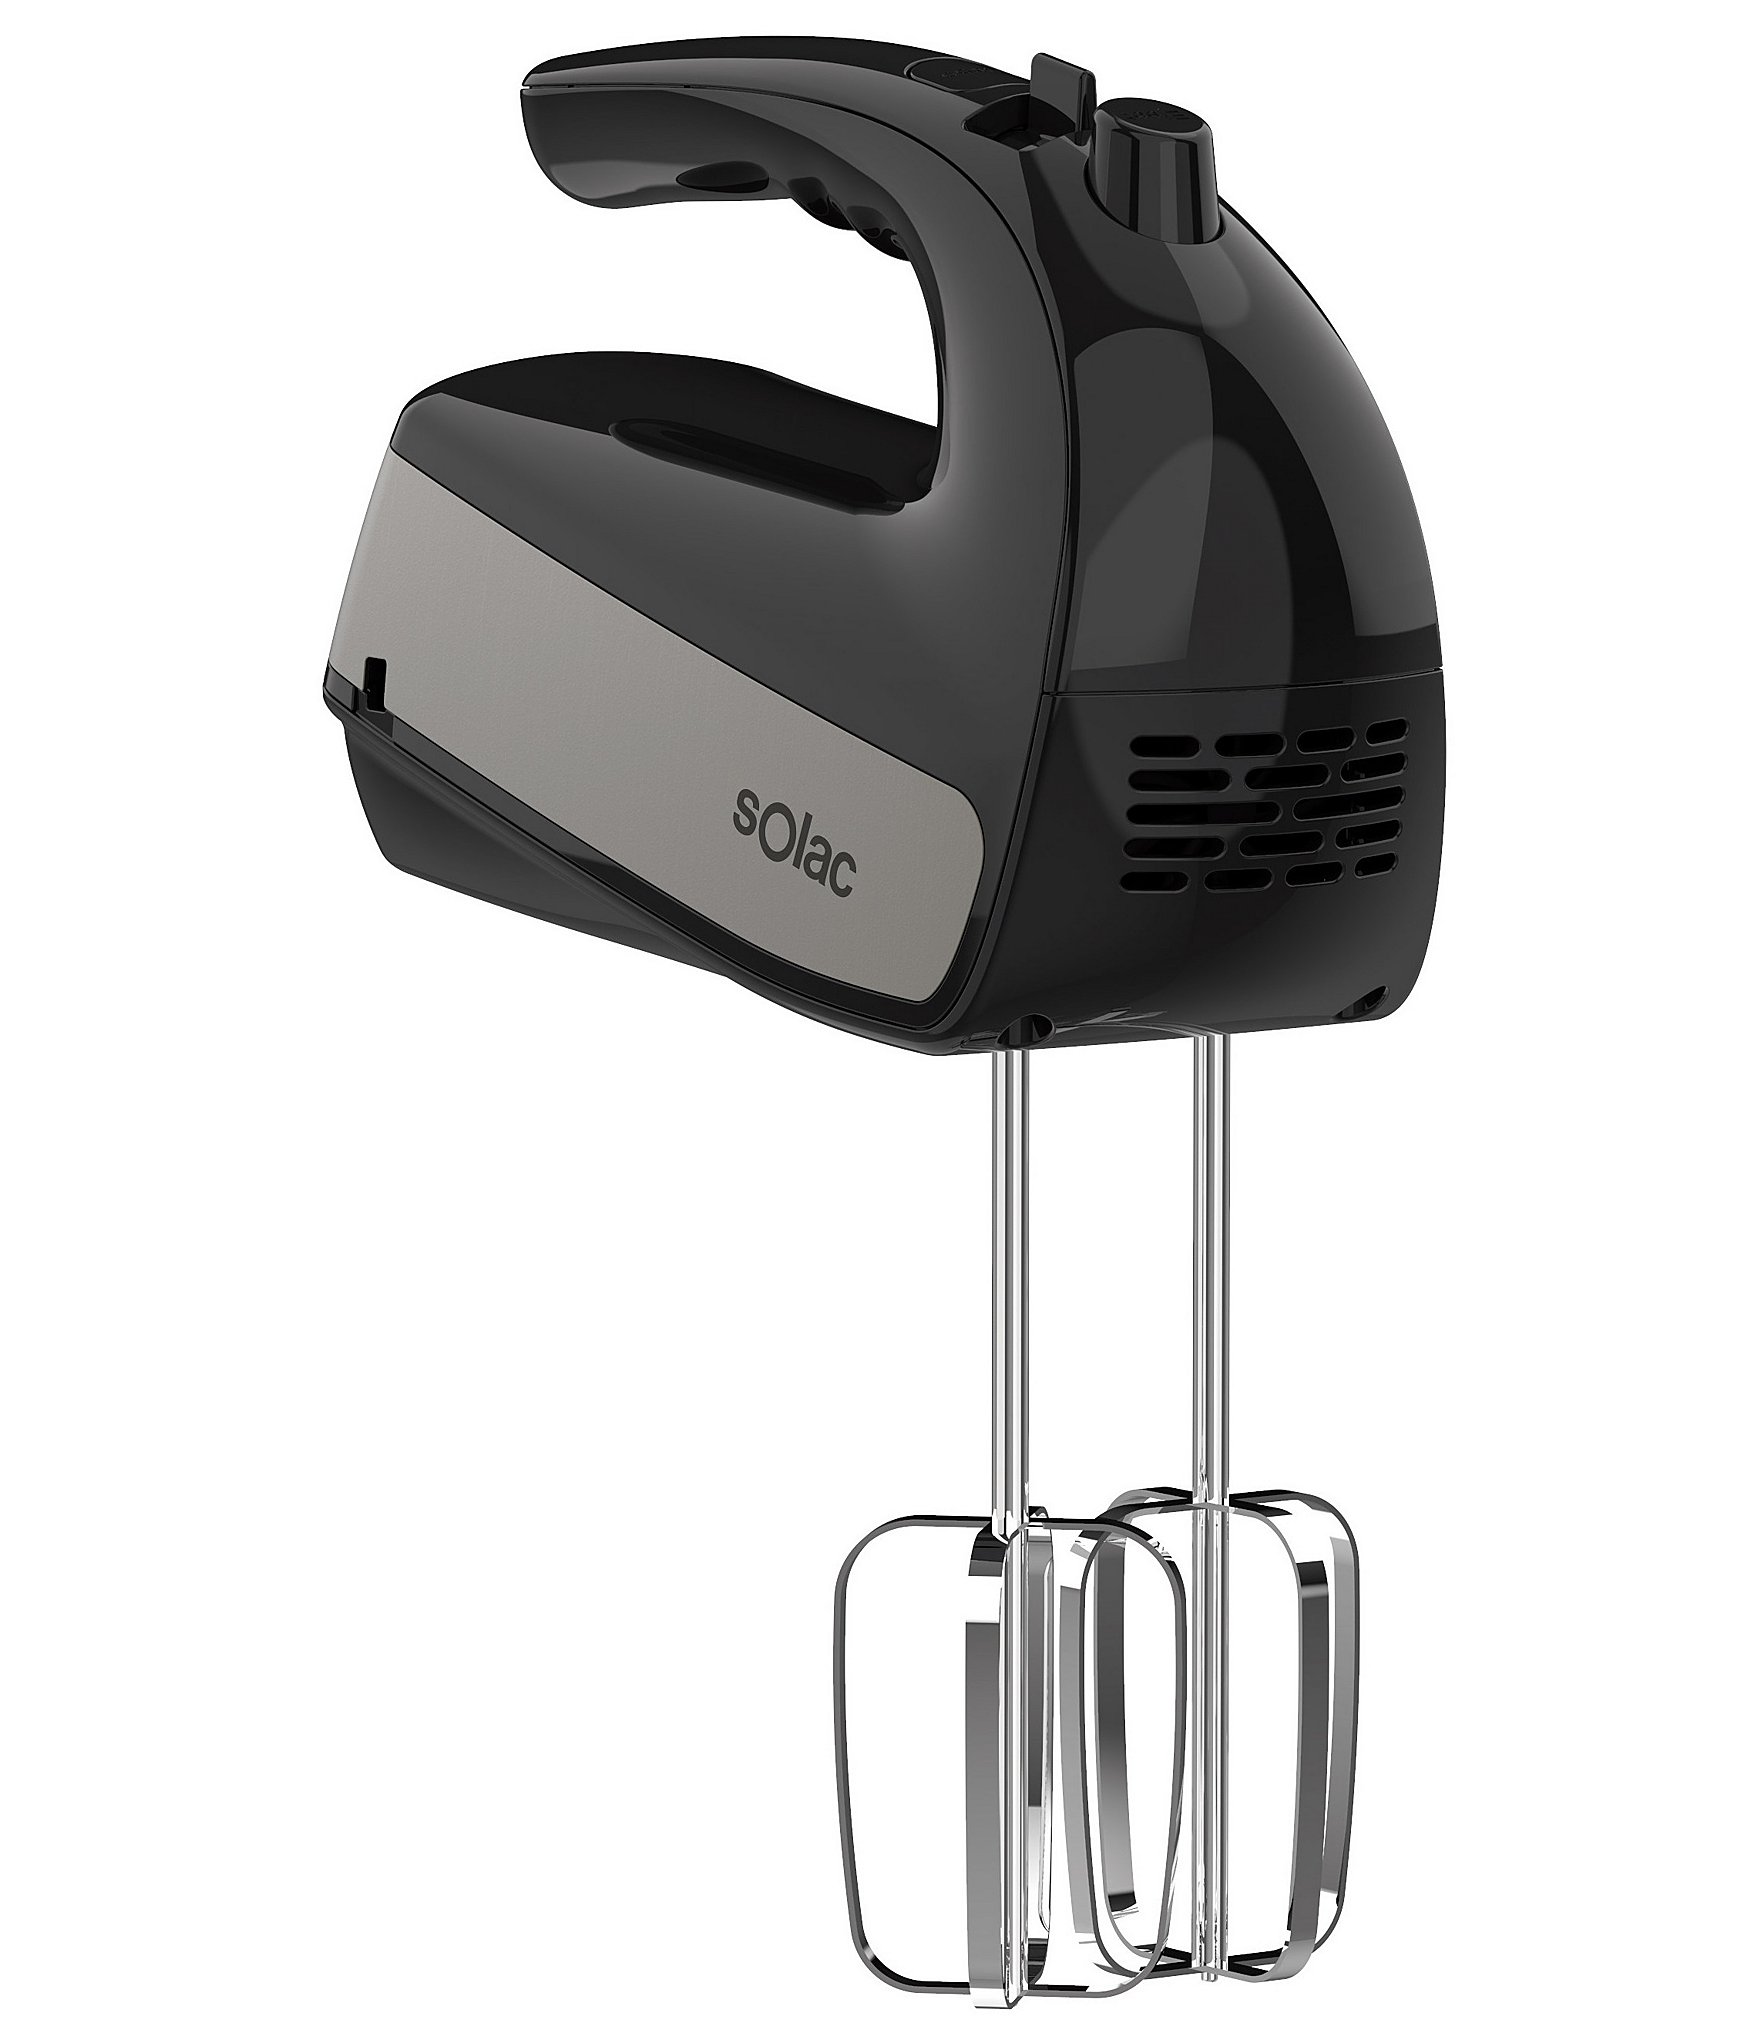 https://dimg.dillards.com/is/image/DillardsZoom/zoom/solac-5-speed--turbo-200w--hand-mixer-with-beaters-and-dough-hooks/00000000_zi_20341566.jpg